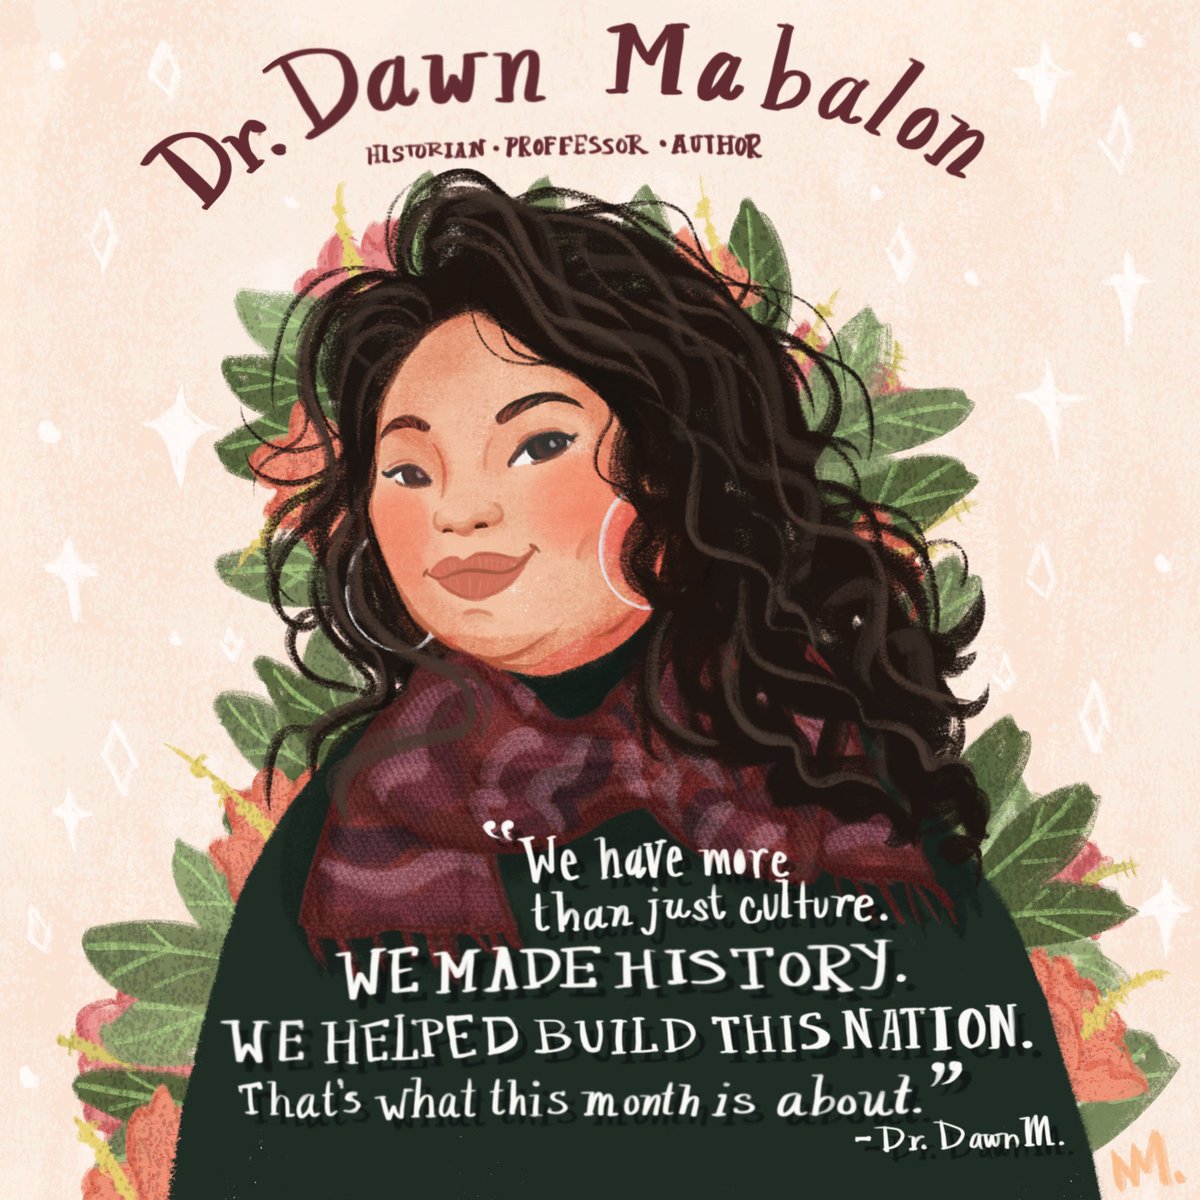 In honor of Filipino American History Month, we remember the life’s work of historian Dr. Dawn Mabalon. “..we haven't just contributed lumpia, dancing and Bruno Mars. We've given to one of the major social movements that changed this nation.” #FilipinoAmericanHistoryMonth